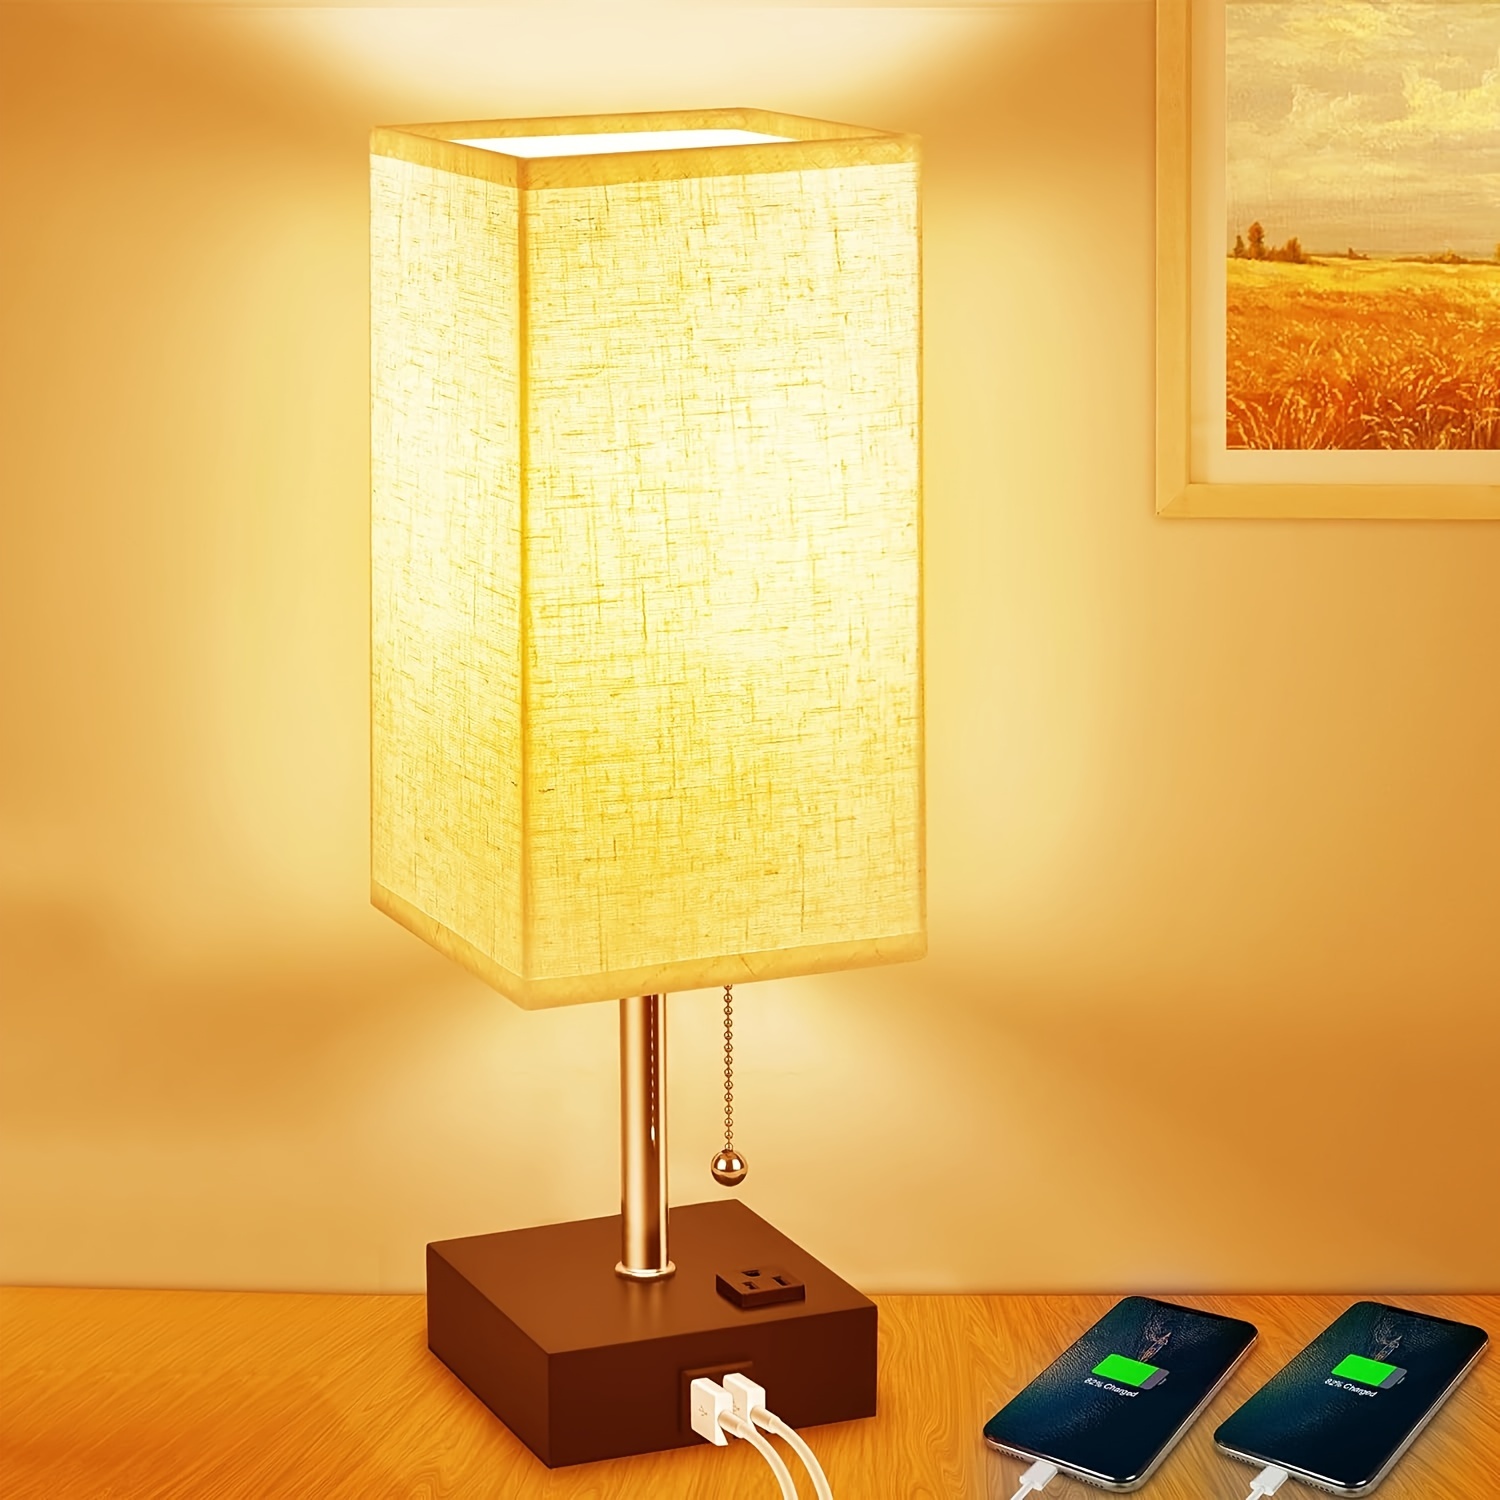  GGOYING Set of 2 Bedside Table Lamp, Pull Chain Table Lamp with  USB C+A Charging Ports, 2700K LED Bulb, Fabric Linen Lampshade, Nightstand  Lamp for End Table Livingroom Bedroom Office Guestroom 